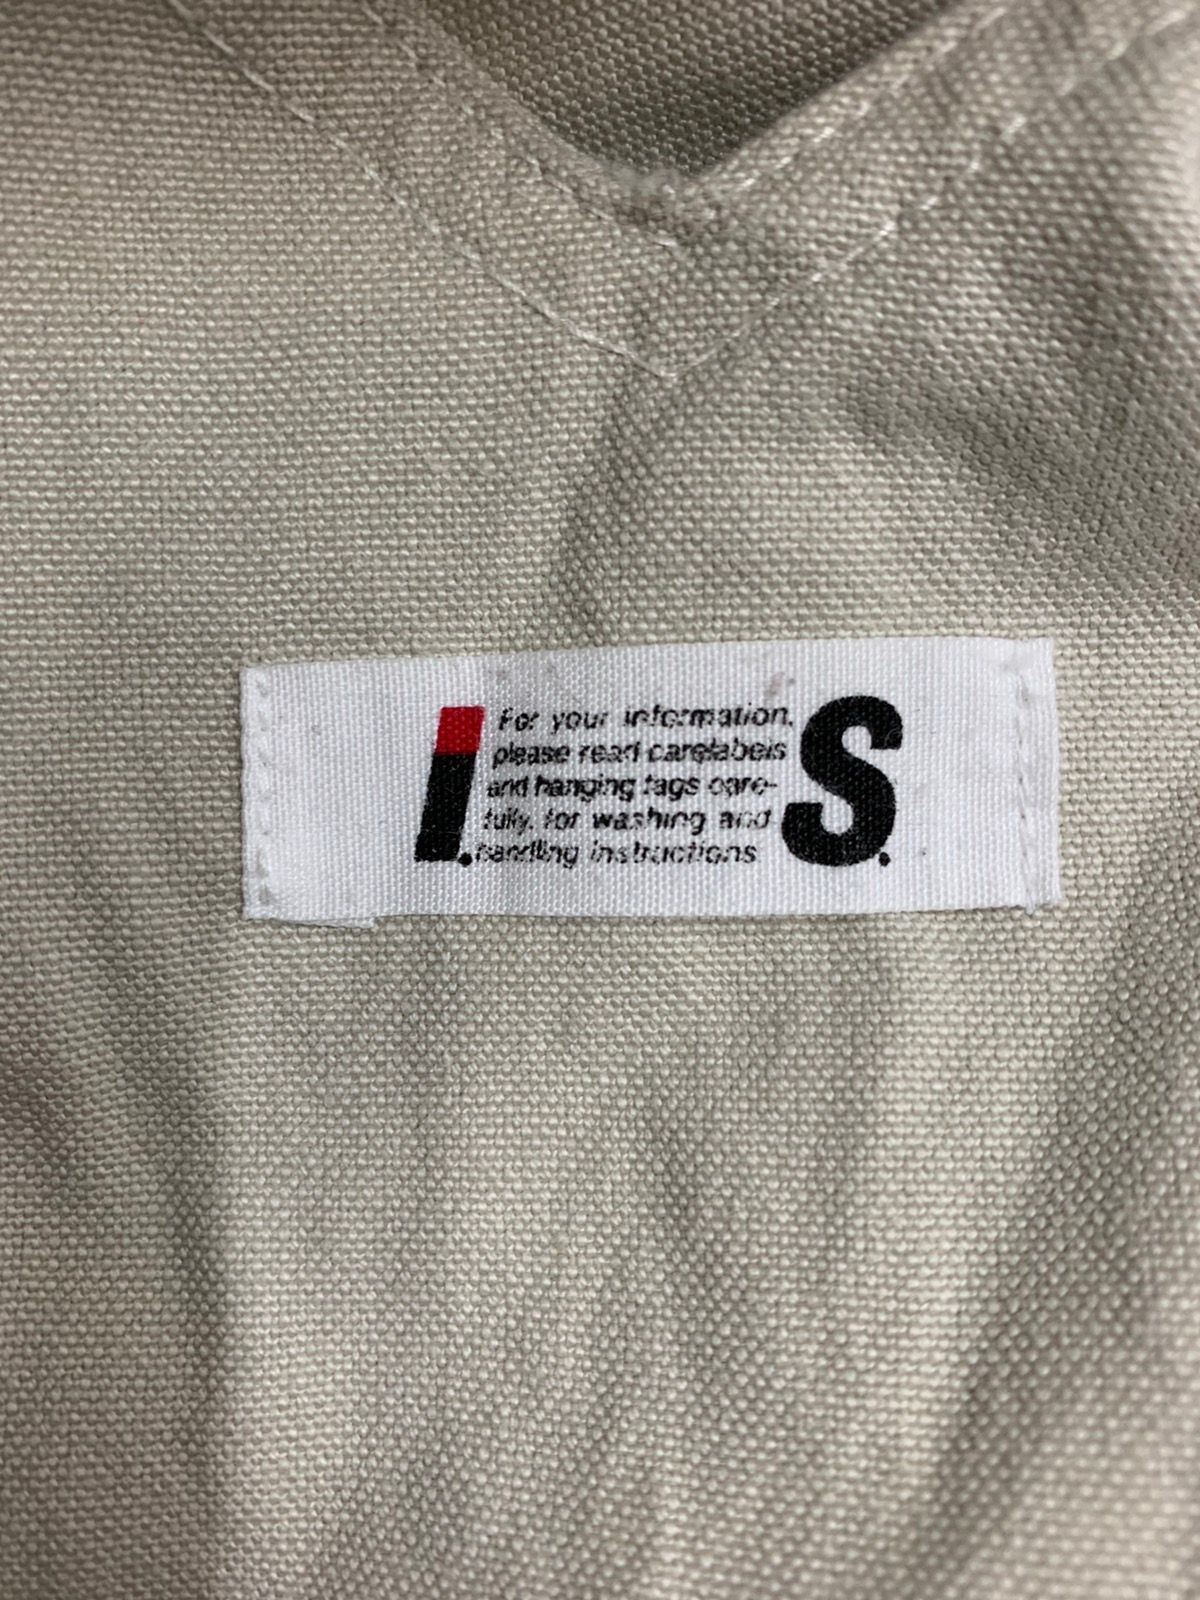 Issey Miyake IS Issey Miyake Issey Sport 80s Overells Jacket Size M / US 6-8 / IT 42-44 - 8 Thumbnail